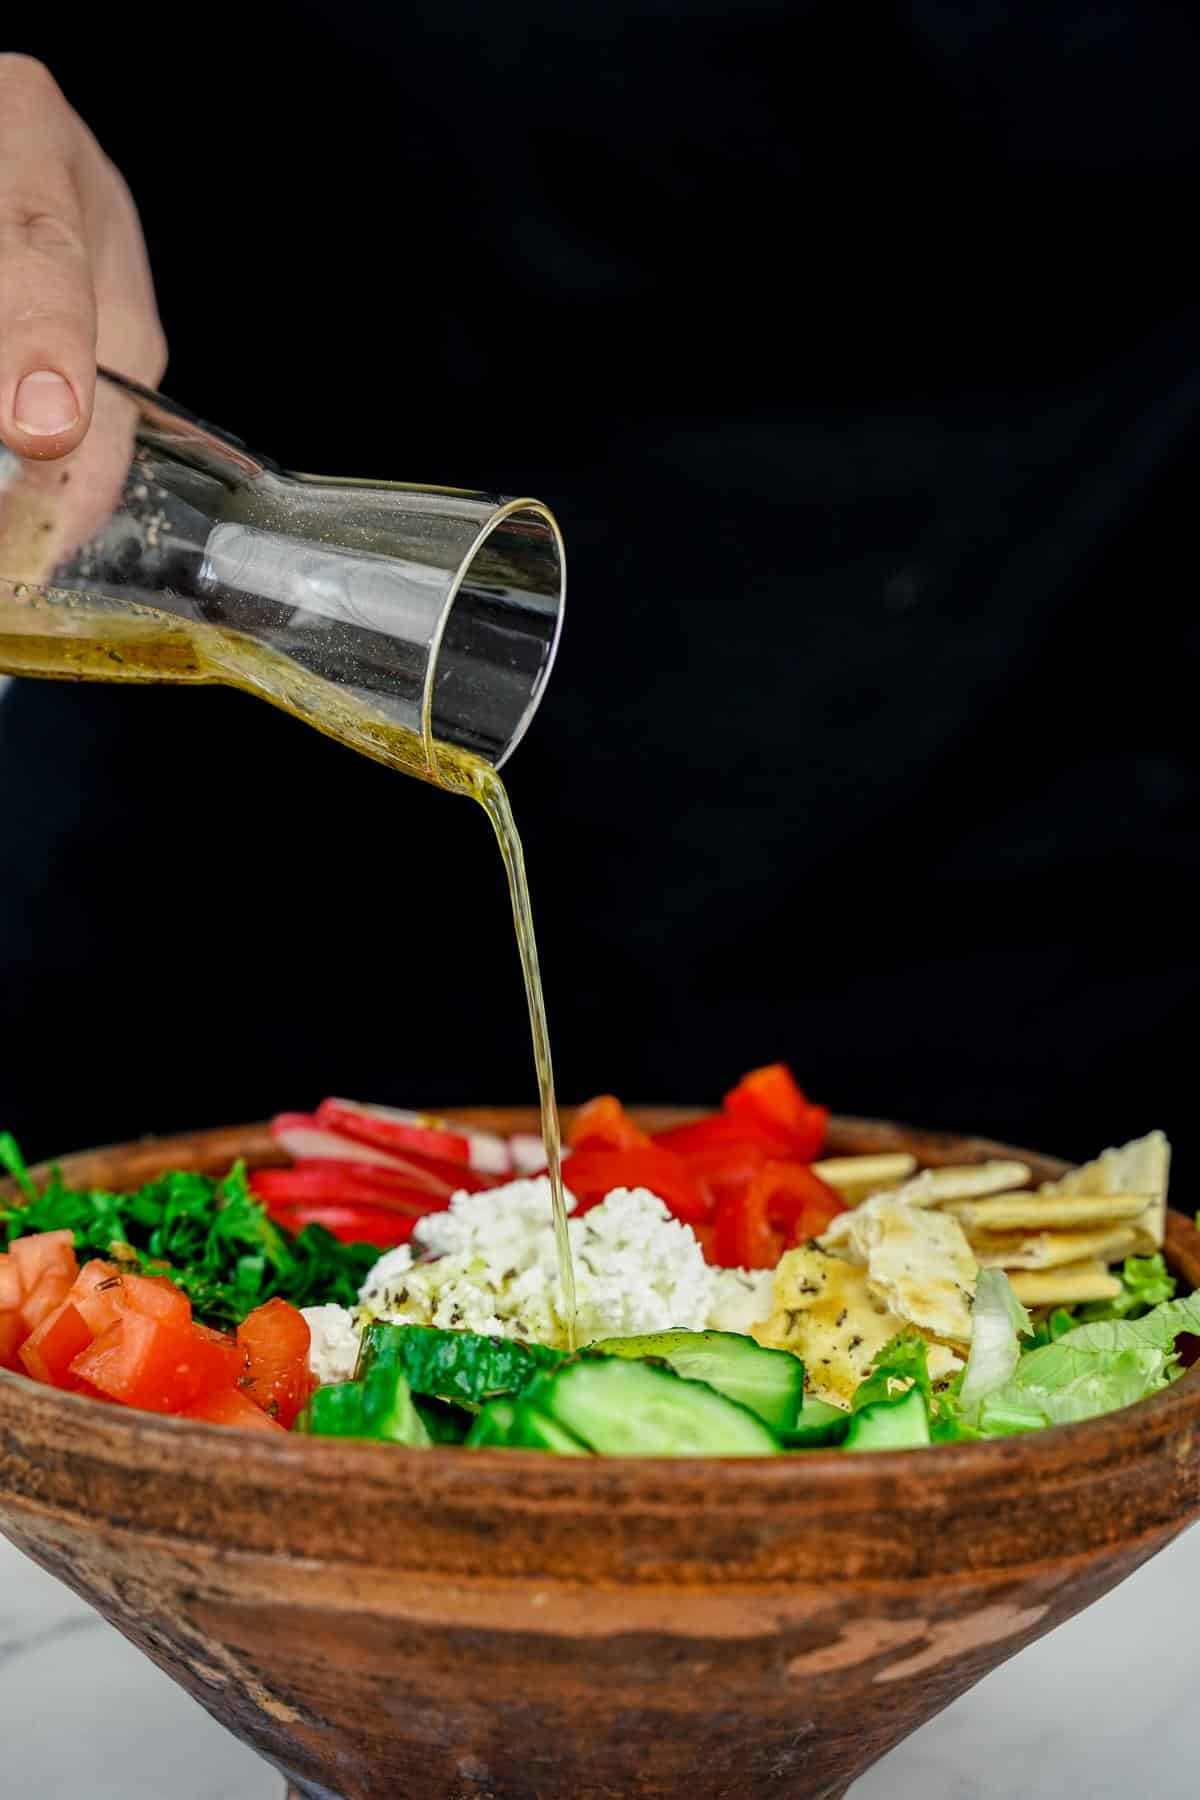 dressing being poured over salad in wooden bowl